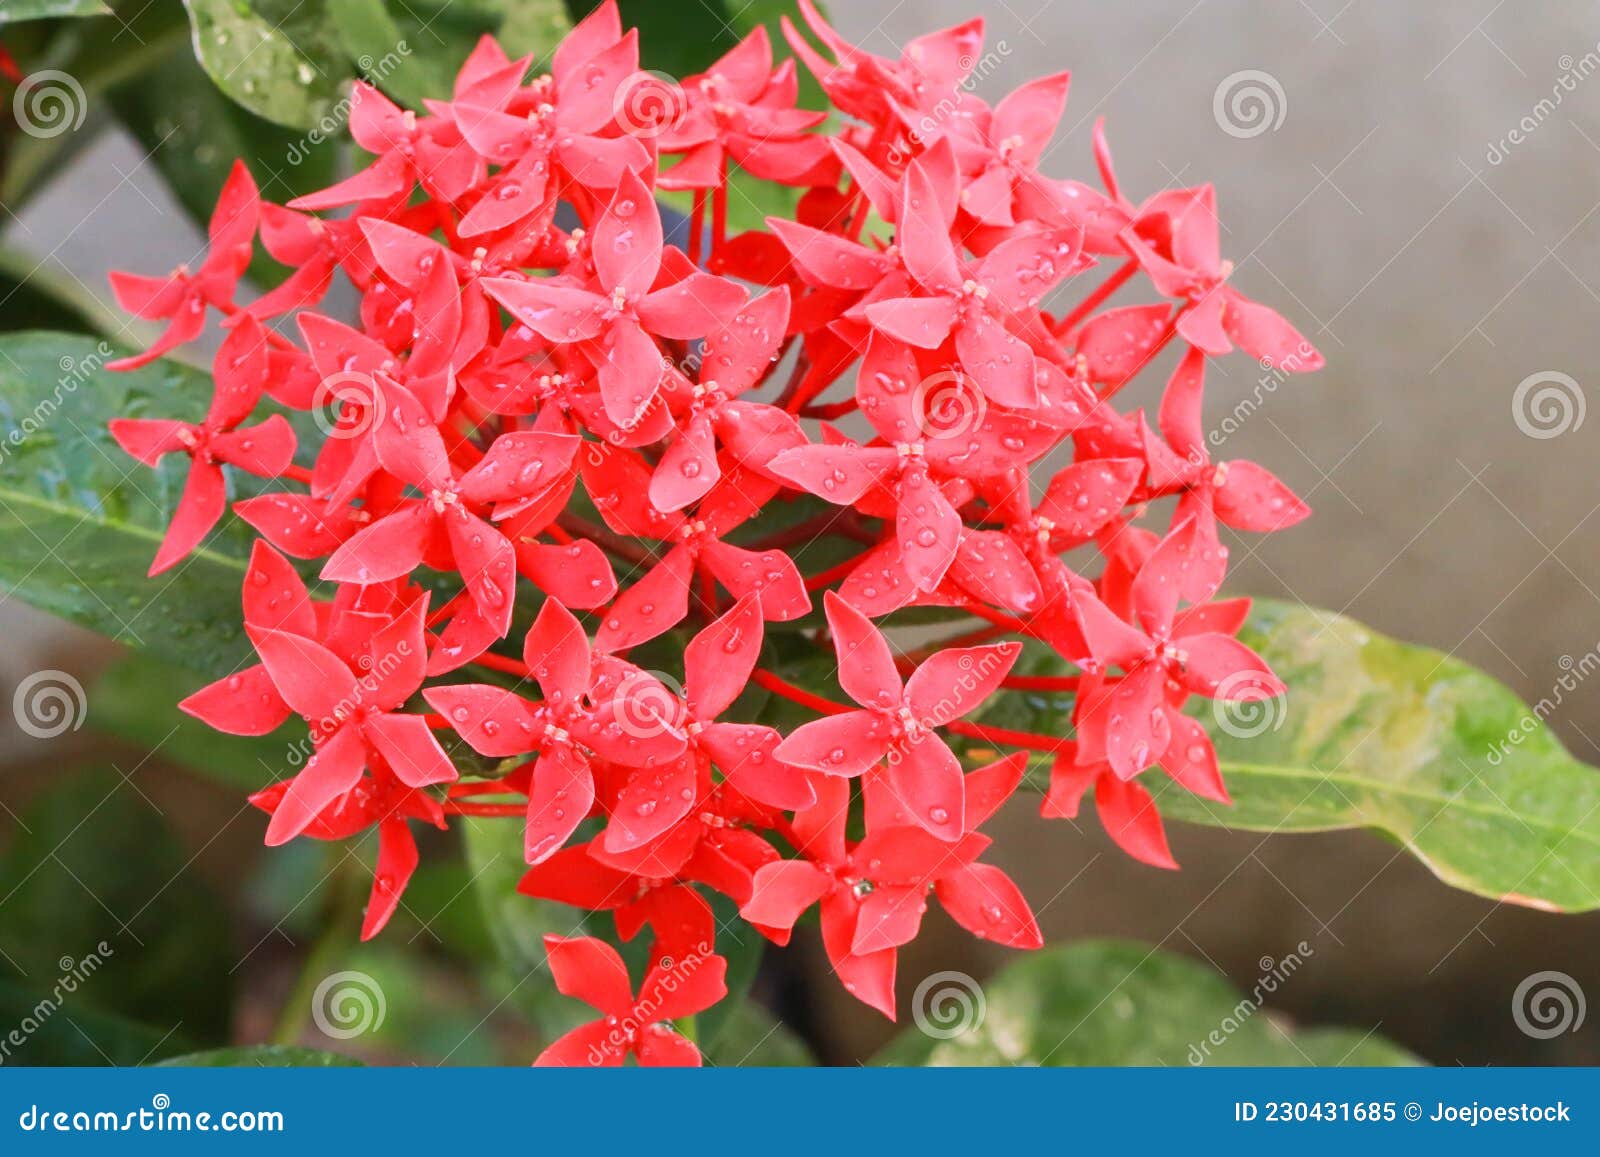 Beautiful Red Spike Flower Ixora Blooming in the Garden Stock Image - Image  of botany, floral: 230431685